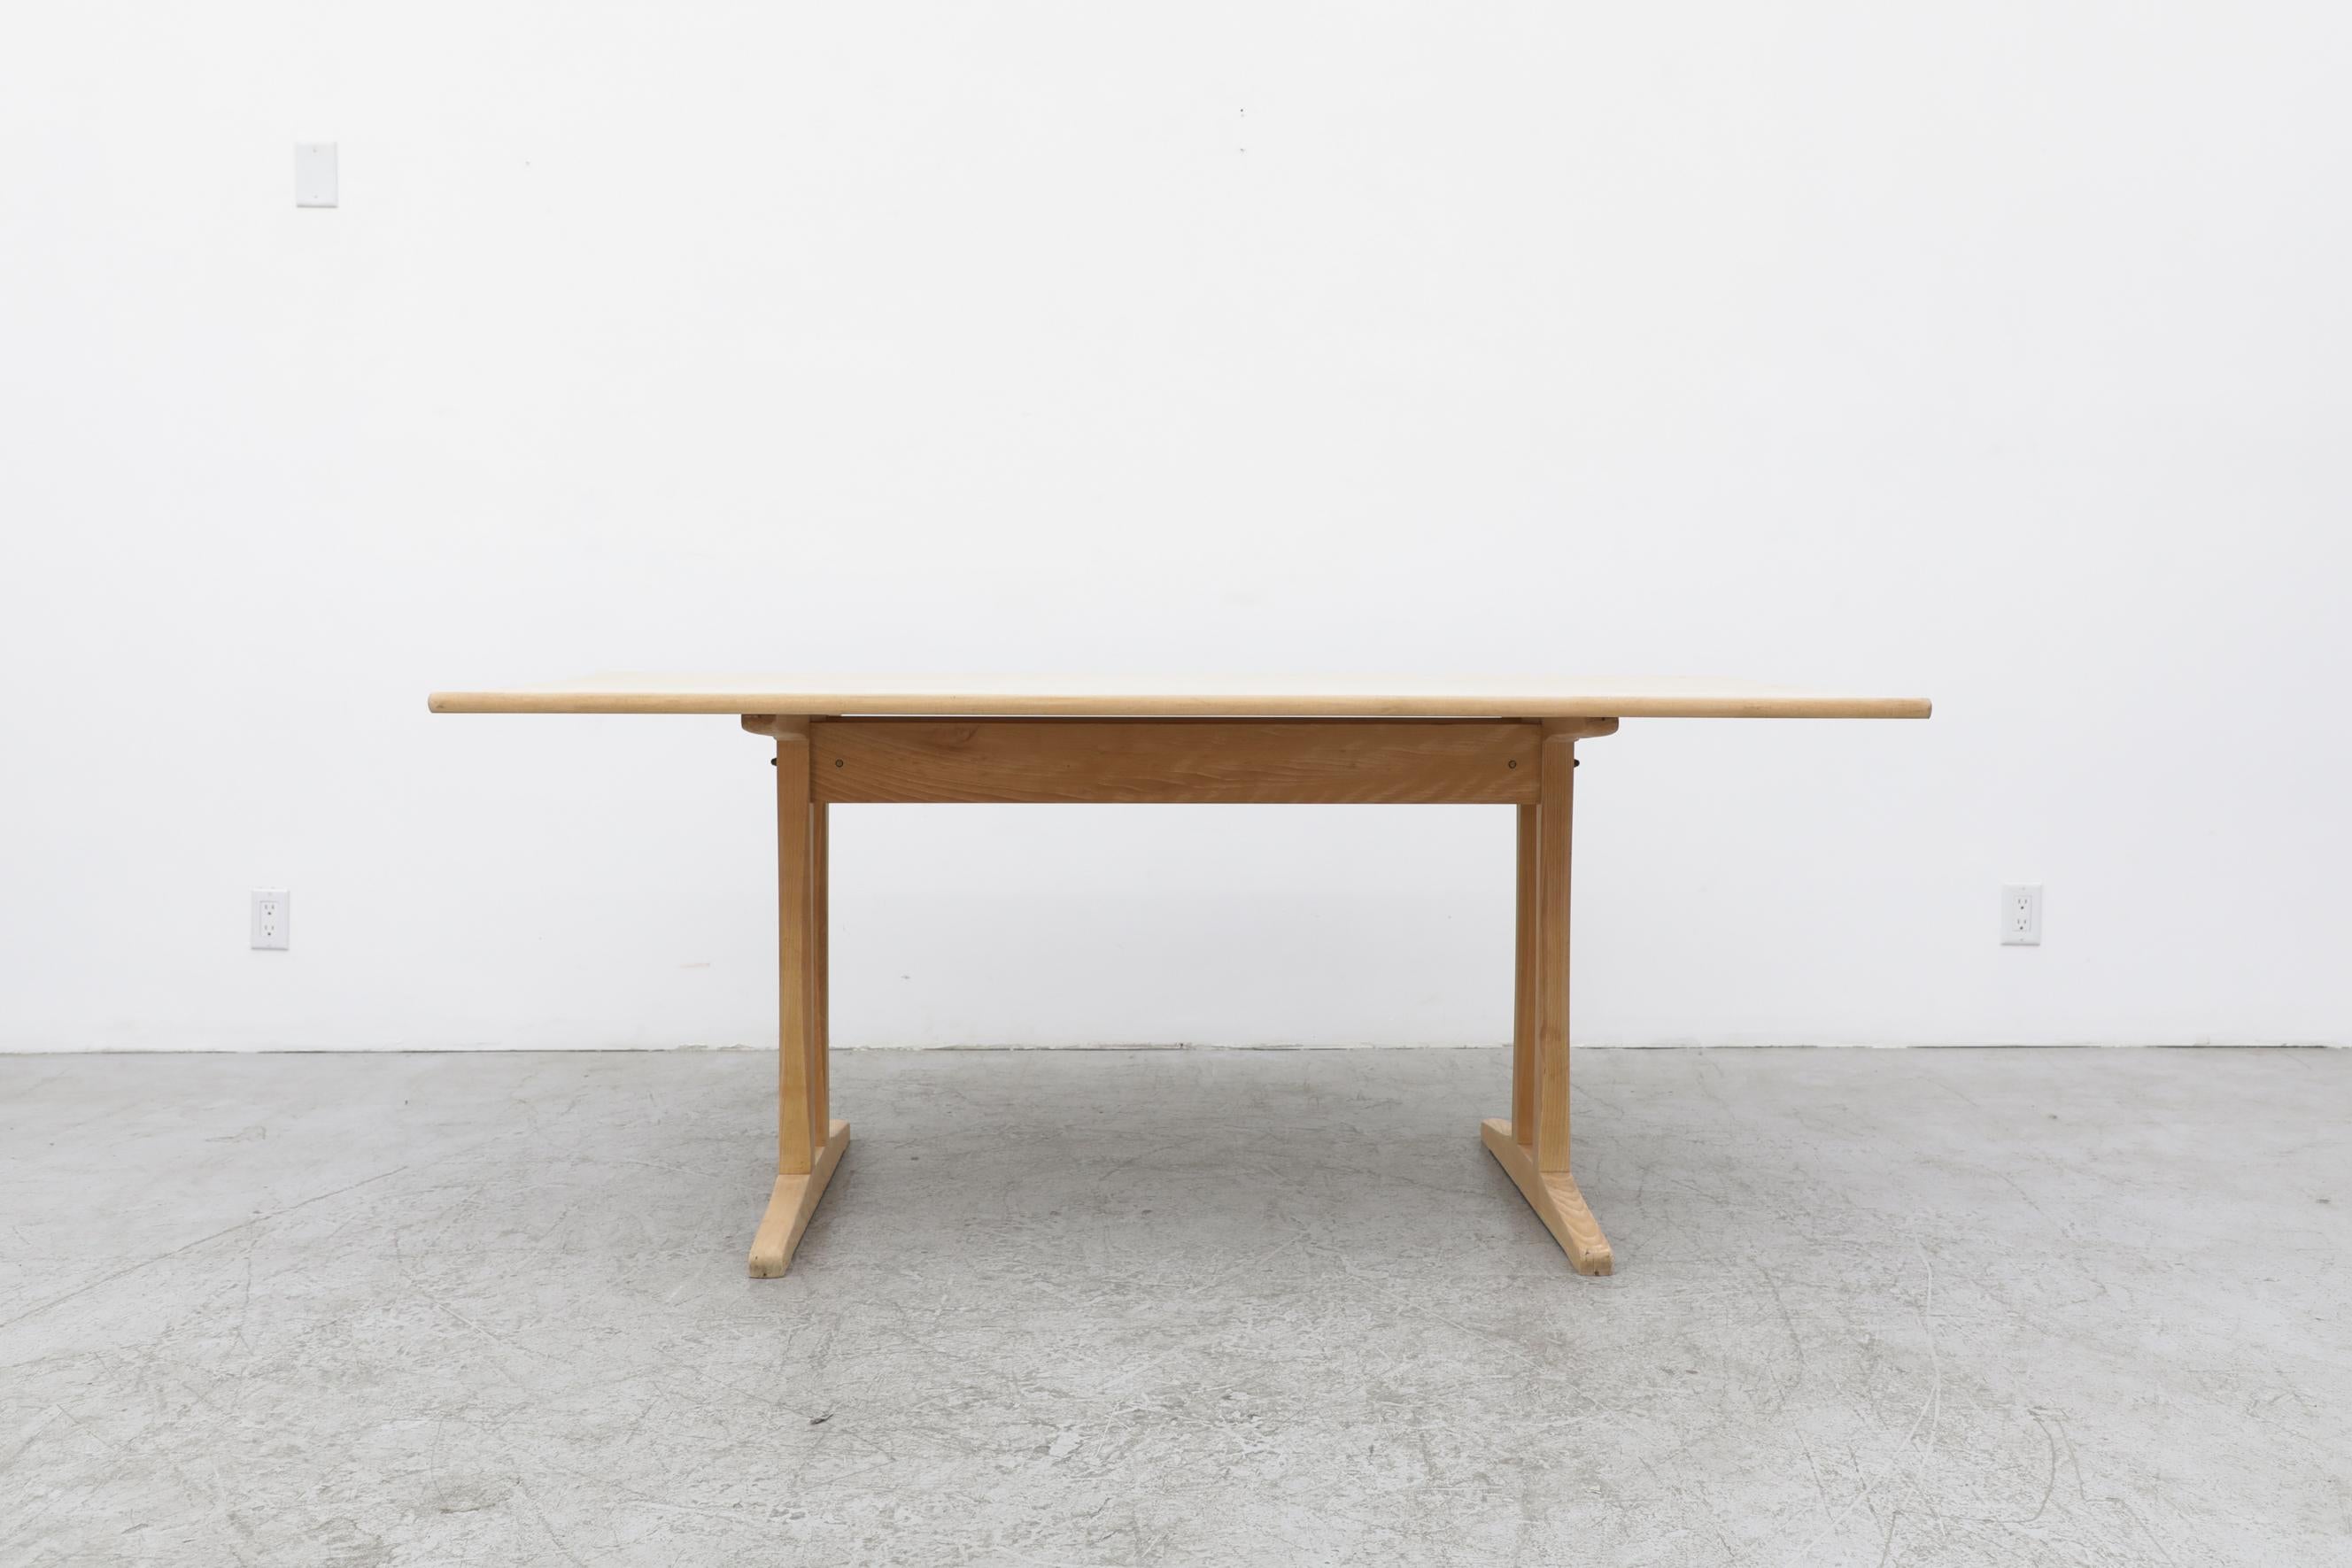 Børge Mogensen C18 oak Shaker dining table for FDB Møbler, 1960s. One of Borge Mogensen's collection of distinctive tables that over time has grown to be considered timeless masterpiece on a national and worldwide level. First created in 1947. In